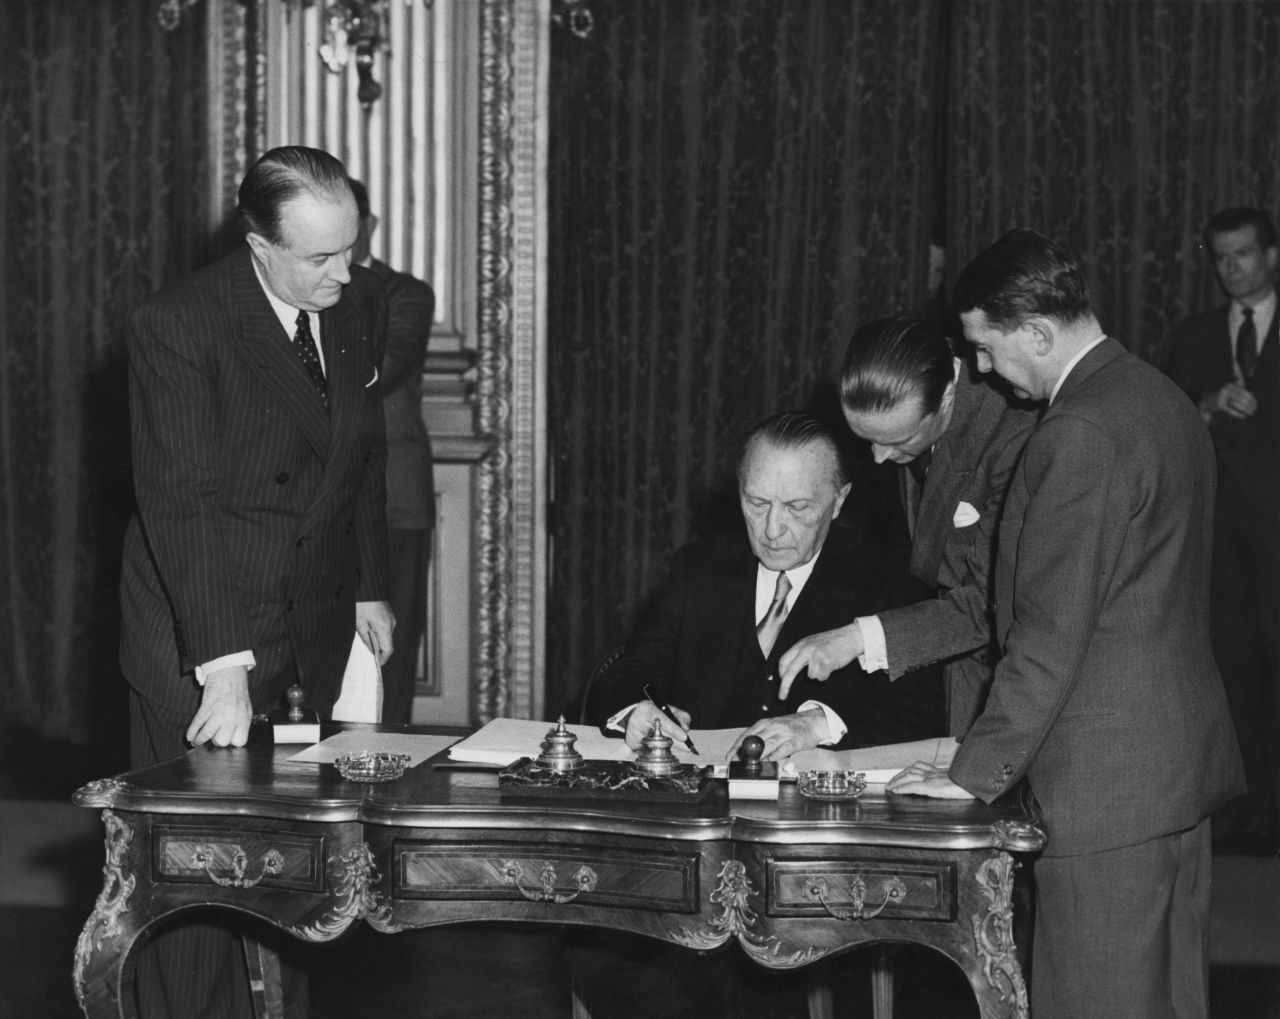 The ECSC, which came into being with the signing of the Treaty of Paris, on 18 April 1951, was designed to make war between France and Germany "not merely unthinkable, but materially impossible."